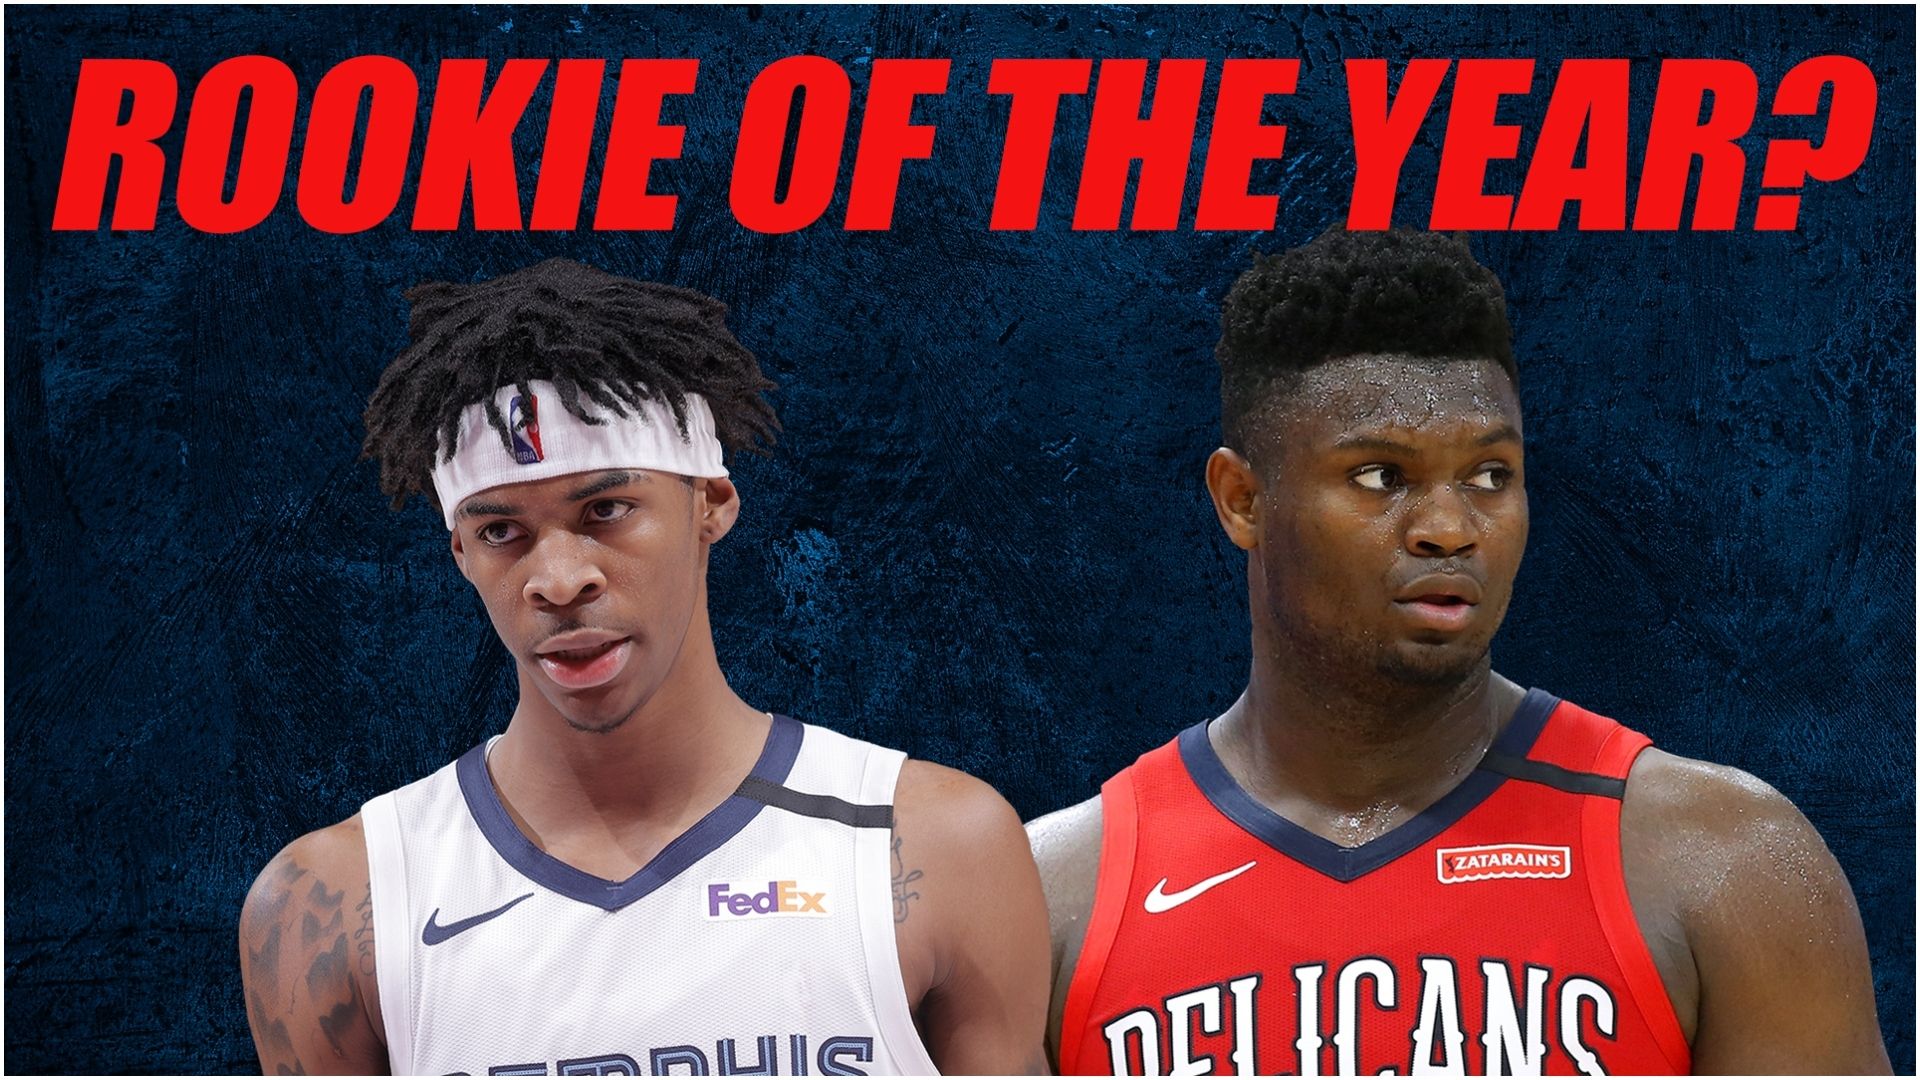 Ja Morant or Zion Williamson: Who is poised to win Rookie of the Year